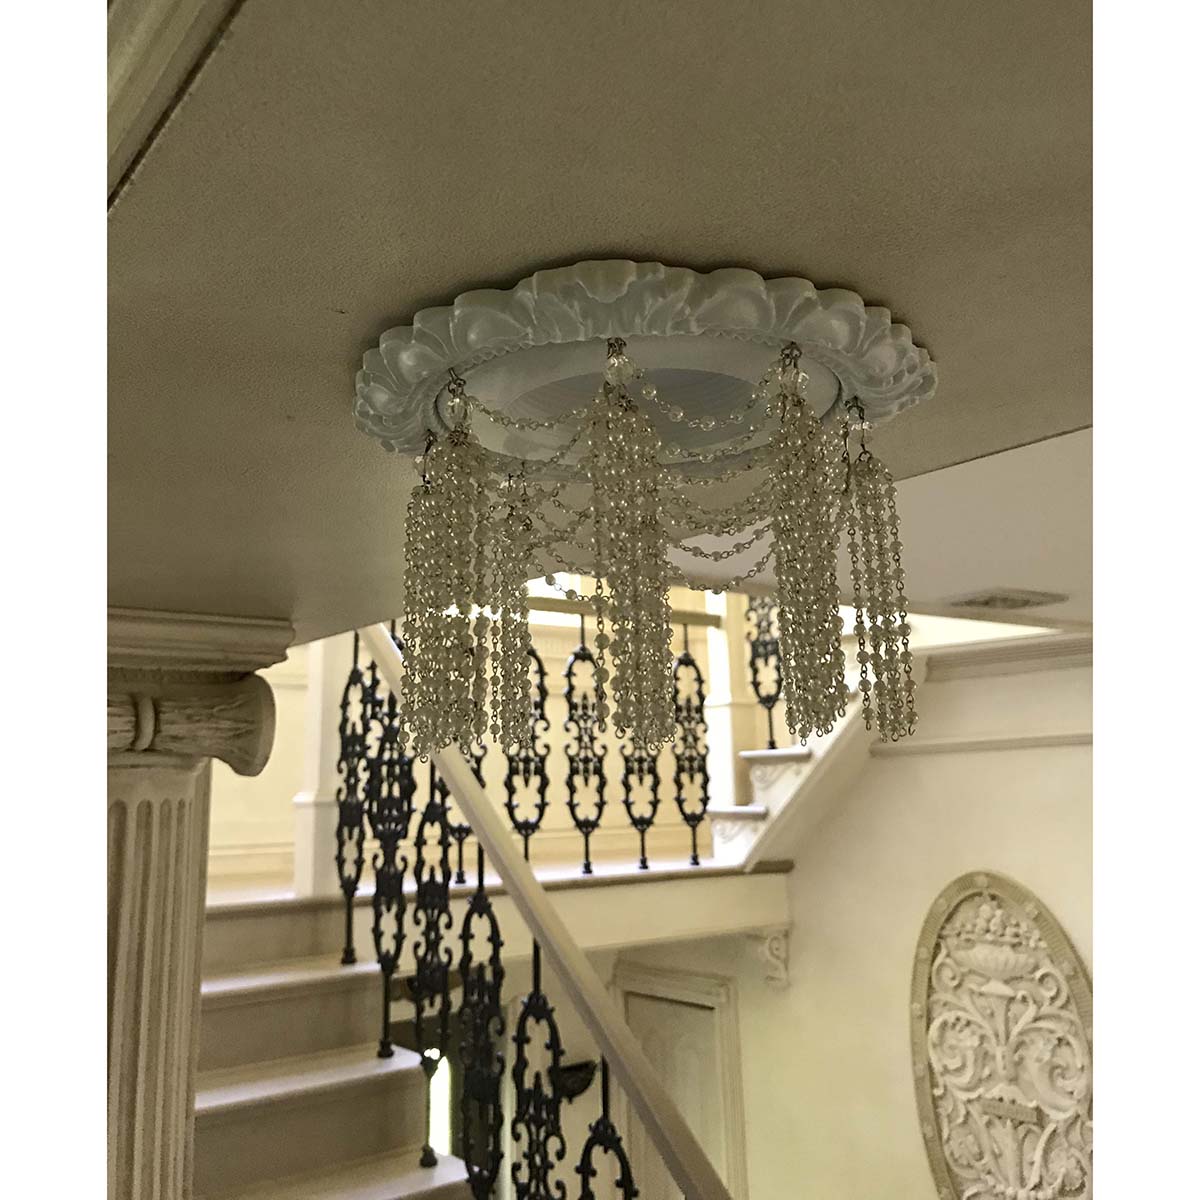 Recesssed Chandelier with Pearl Swags and Tassels